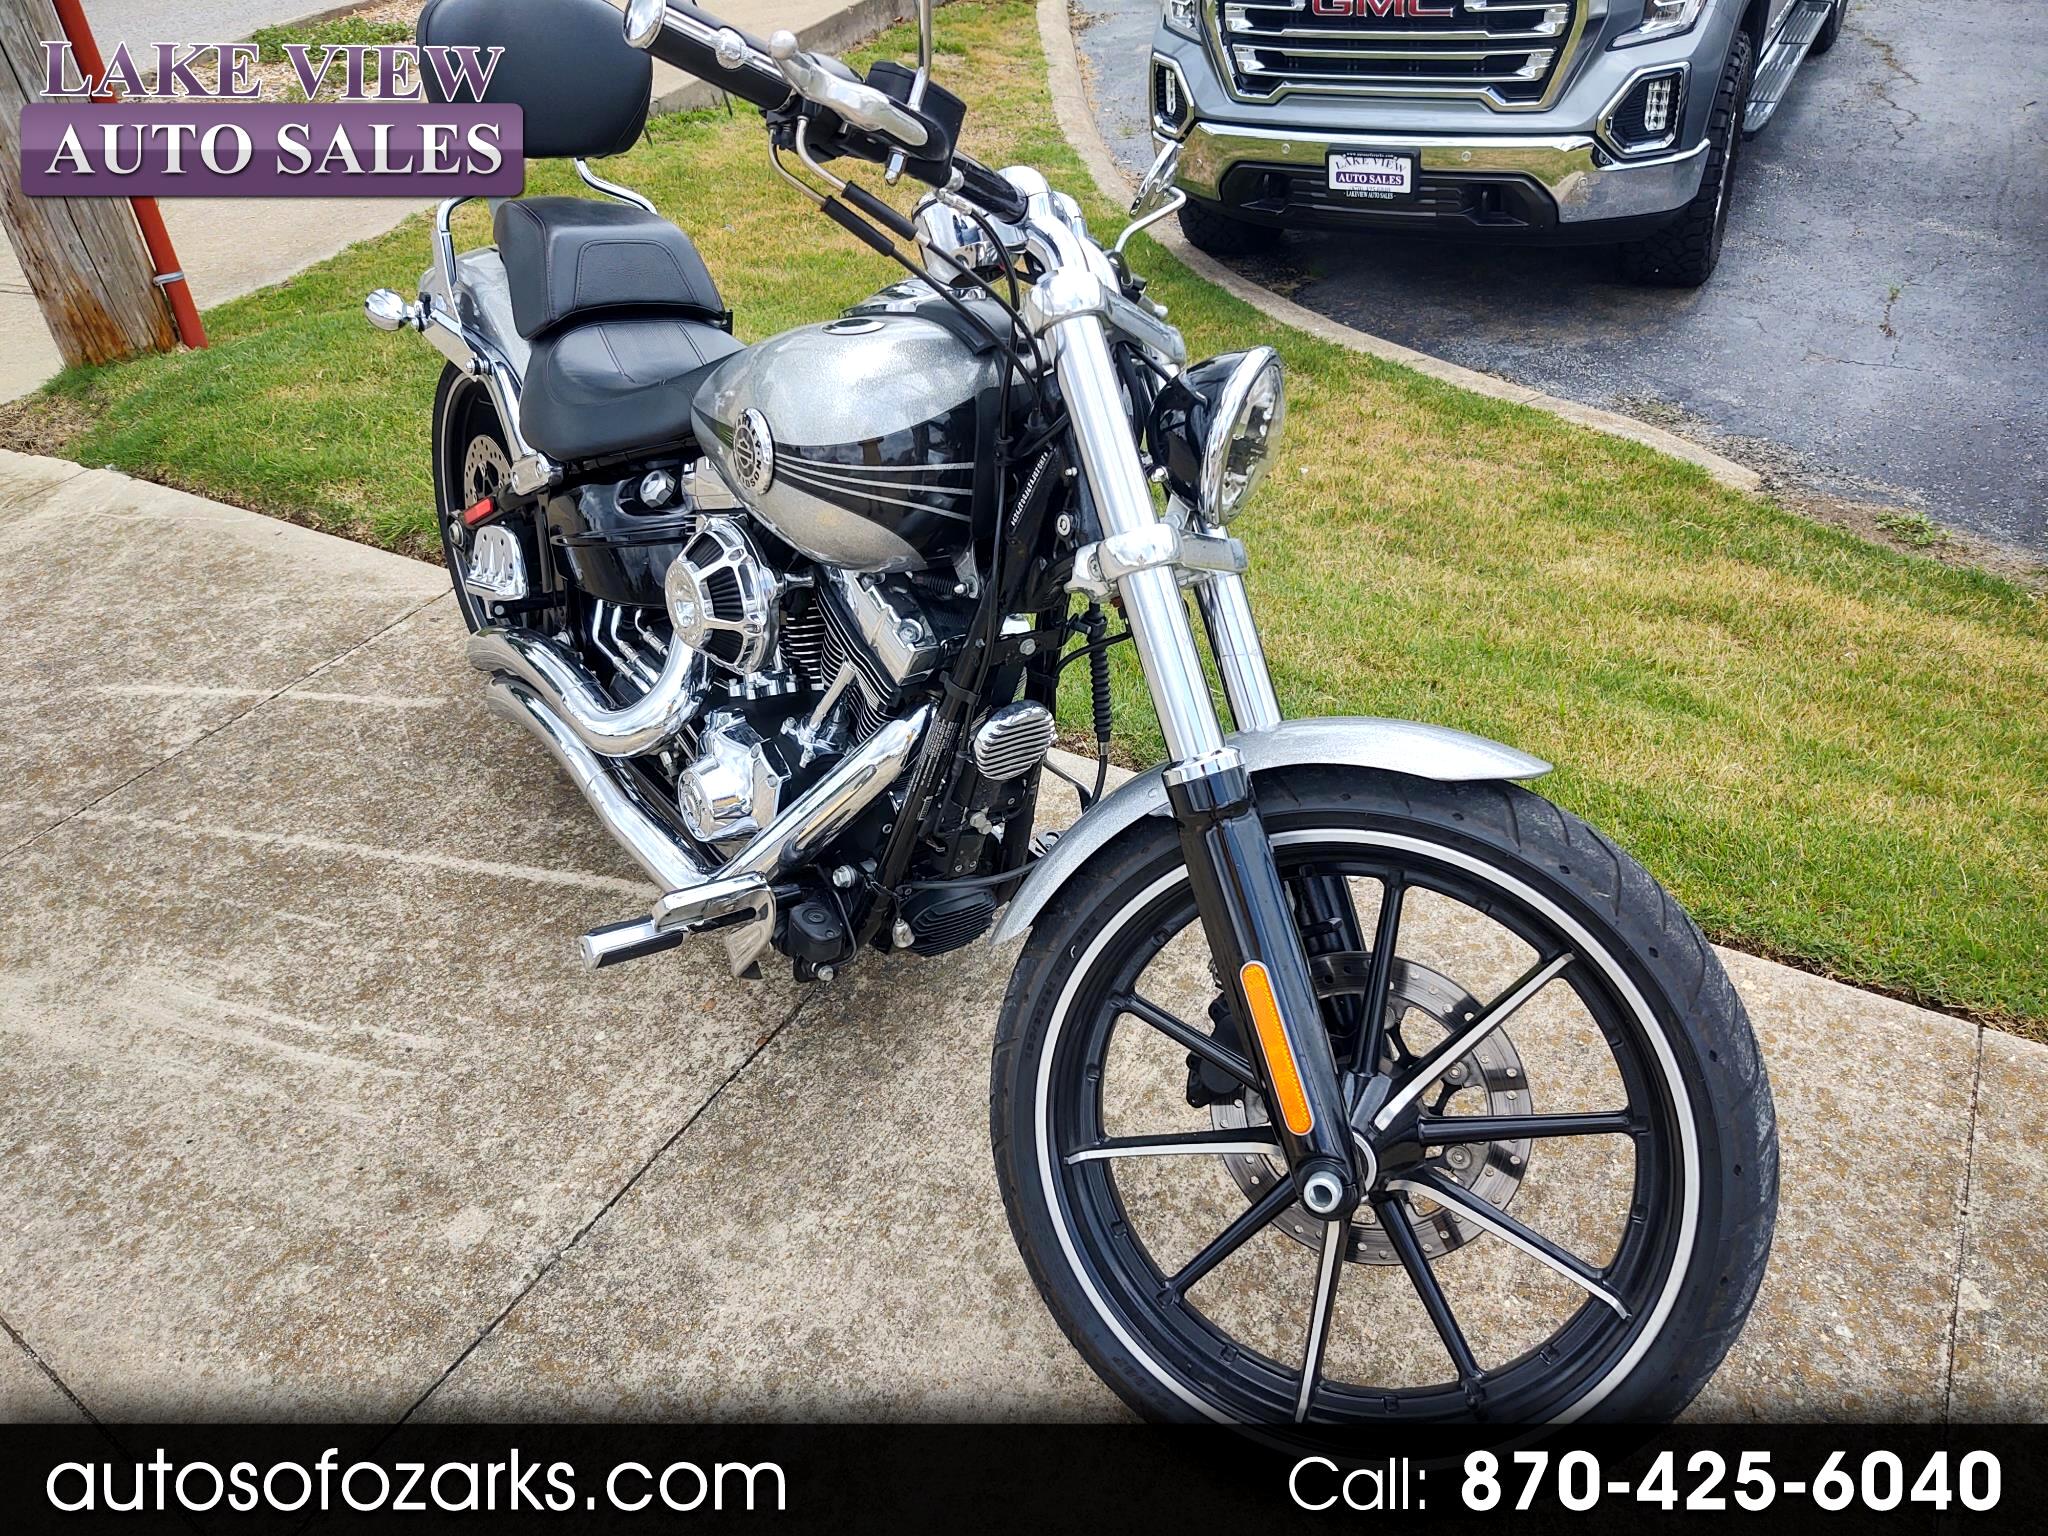 Used 2015 Harley Davidson Breakout For Sale In Mountain Home Ar 72653 Lakeview Auto Sales